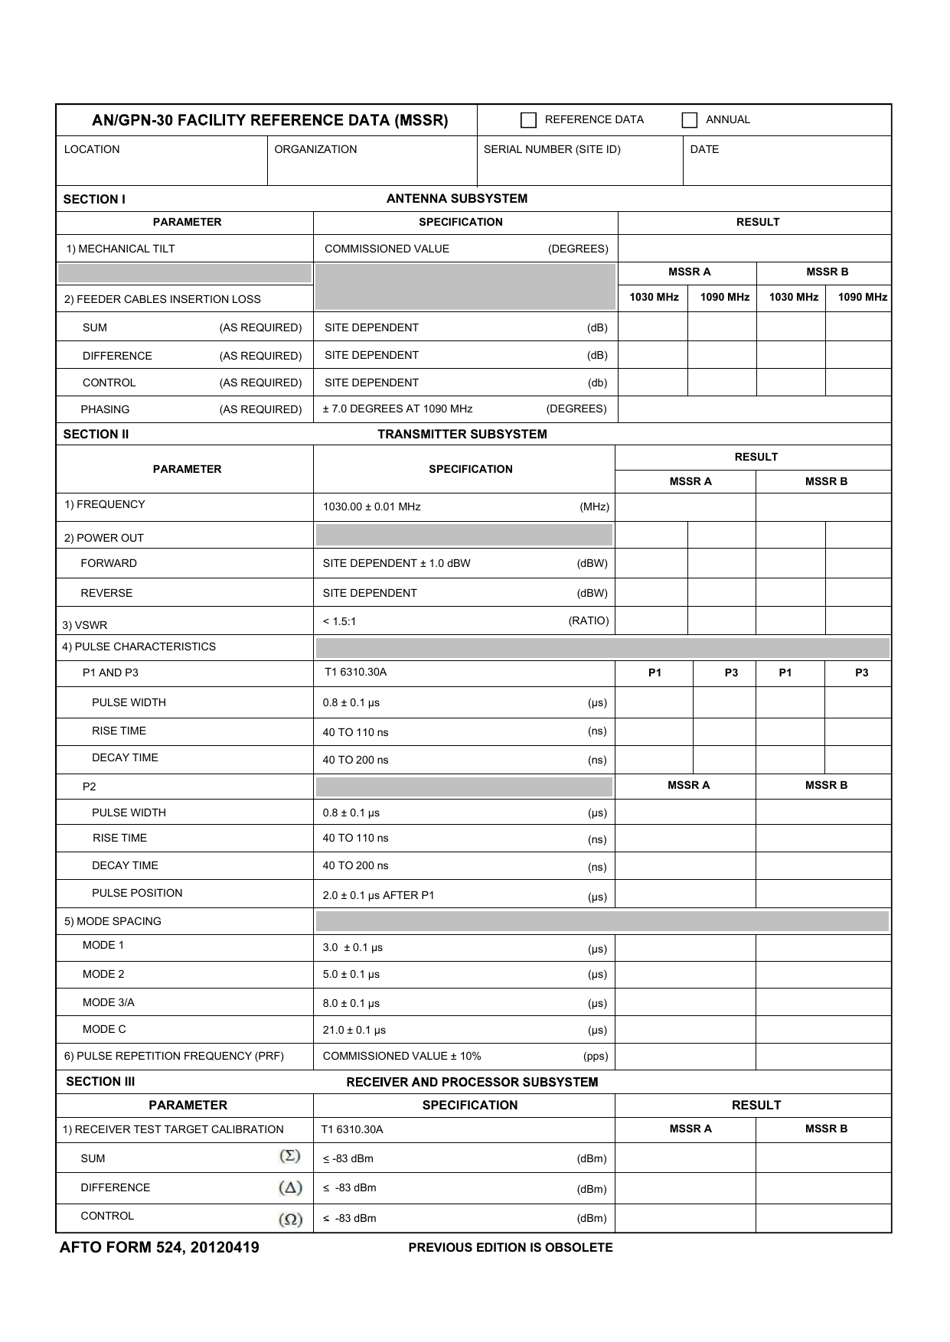 AFTO Form 524 An / Gpn-30 Facility Reference Data (Mssr), Page 1